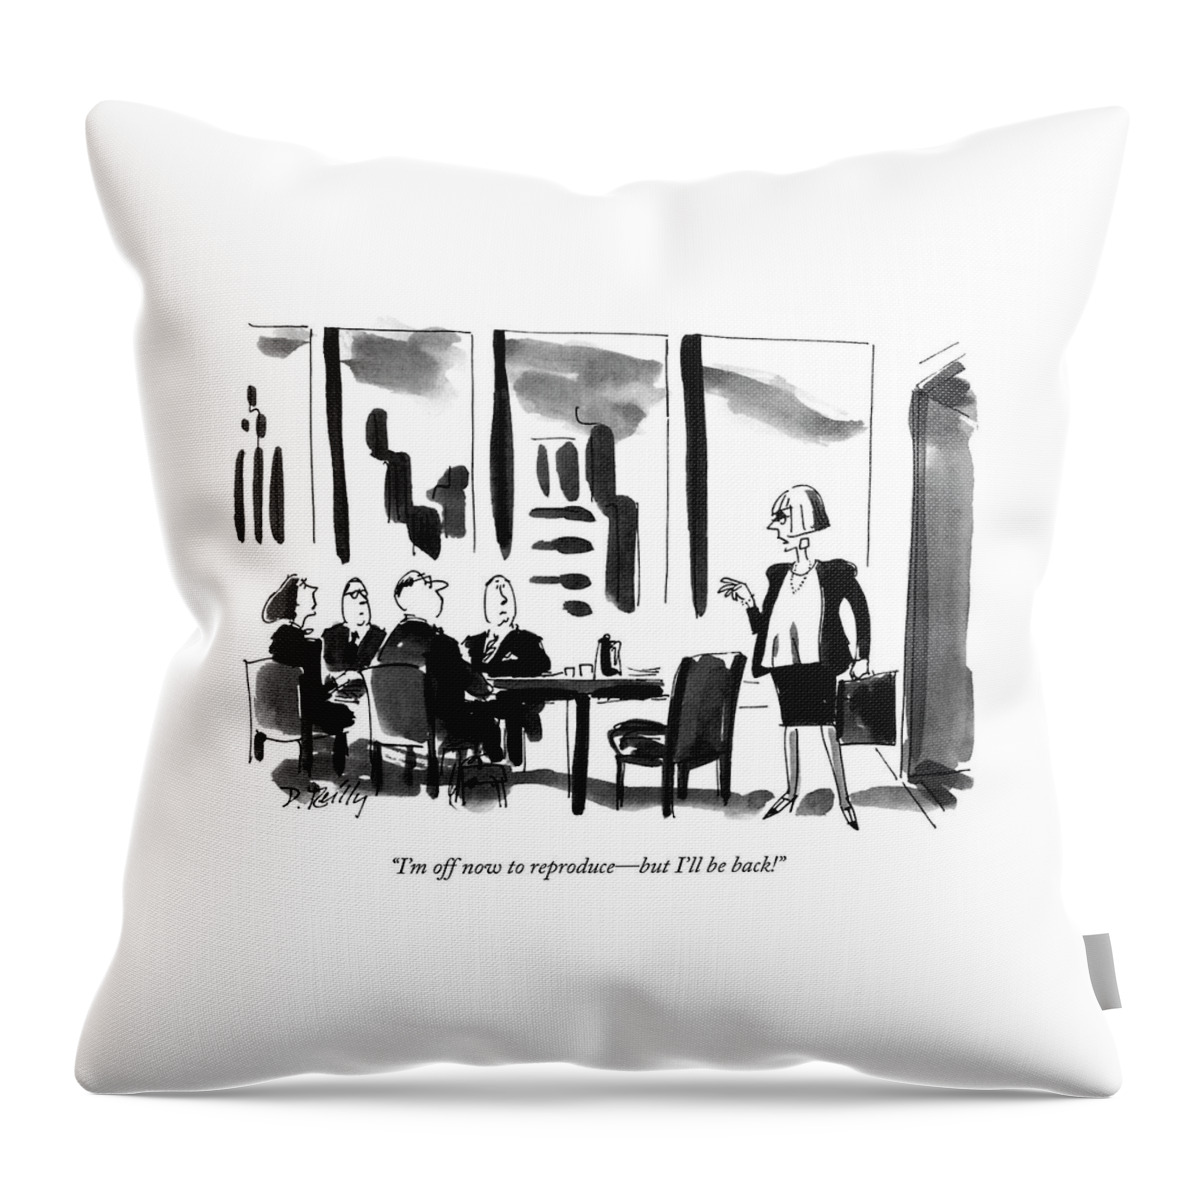 I'm Off Now To Reproduce - But I'll Be Back! Throw Pillow